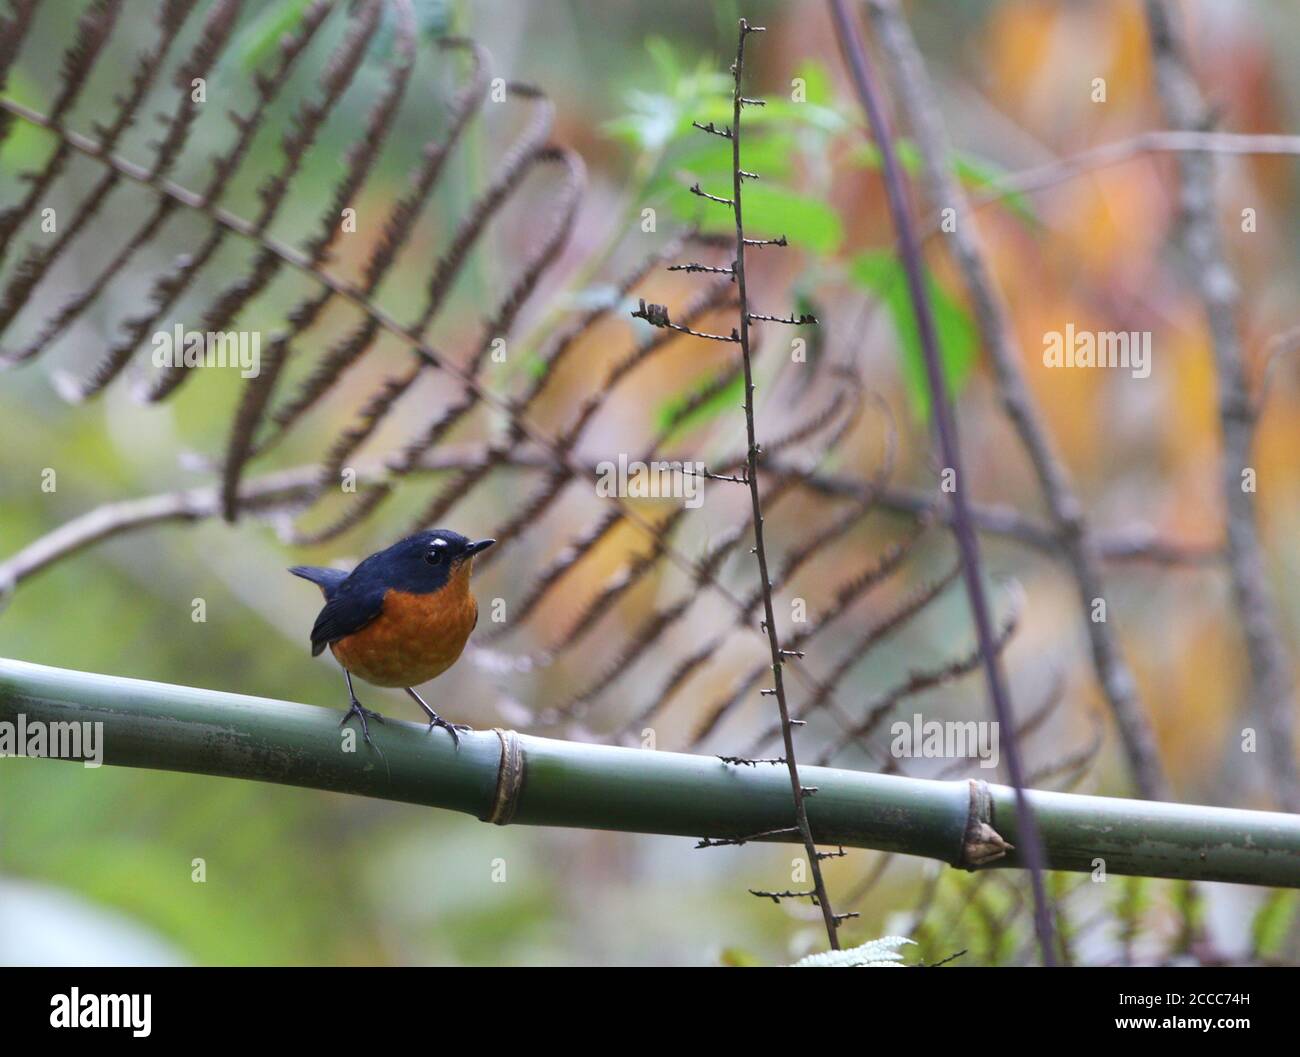 Rusty-bellied Shortwing (Brachypteryx hyperythra) perched on a horizontal branch in undergrowth of the Mishmi hills in India. Stock Photo